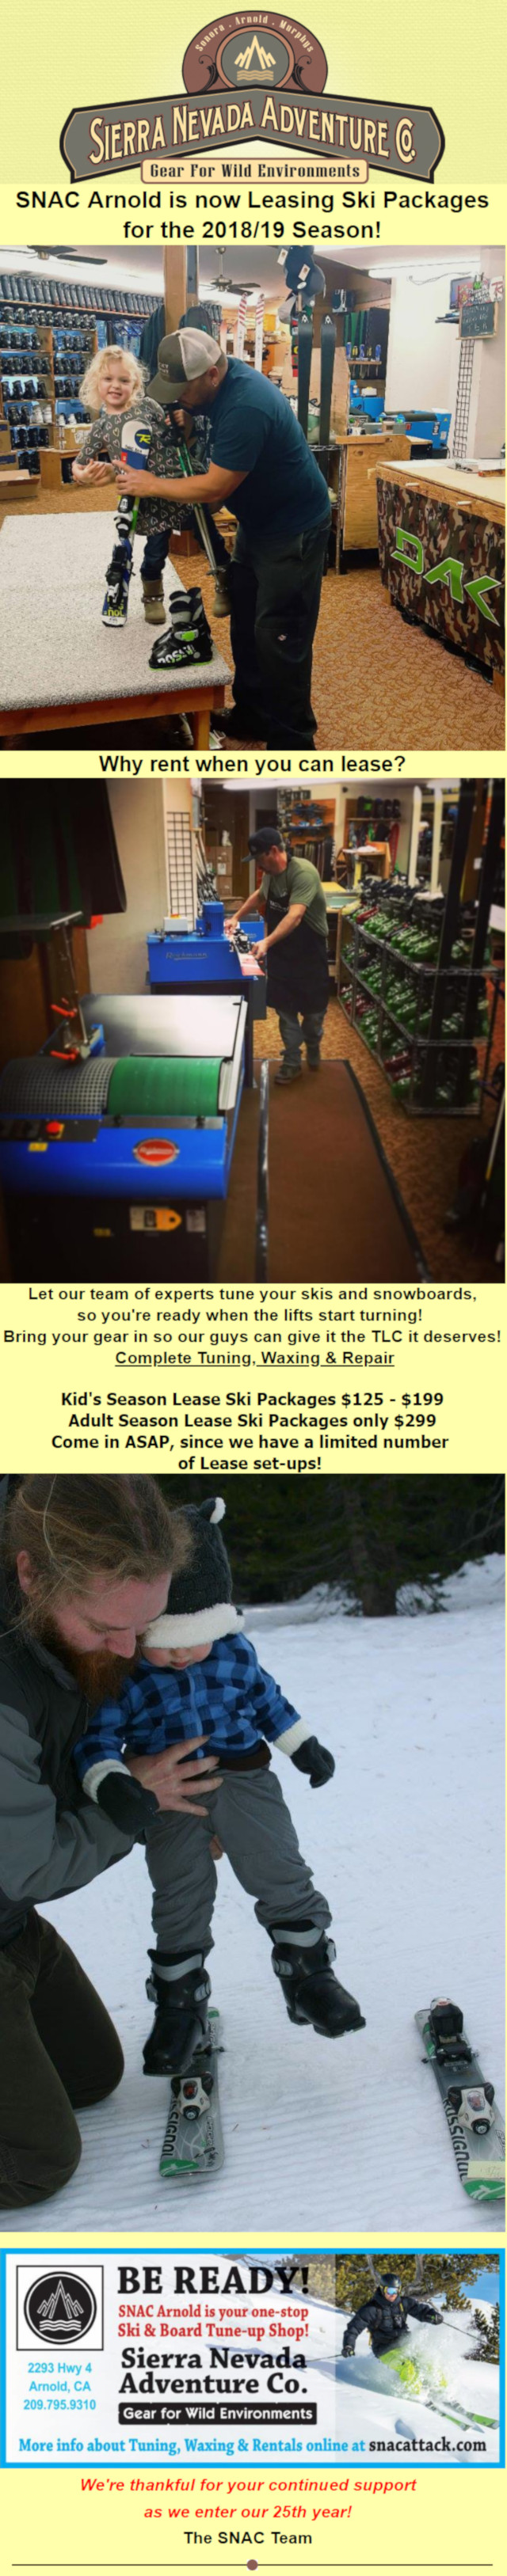 Now Tuning, Waxing & Leasing Ski Packages at SNAC!